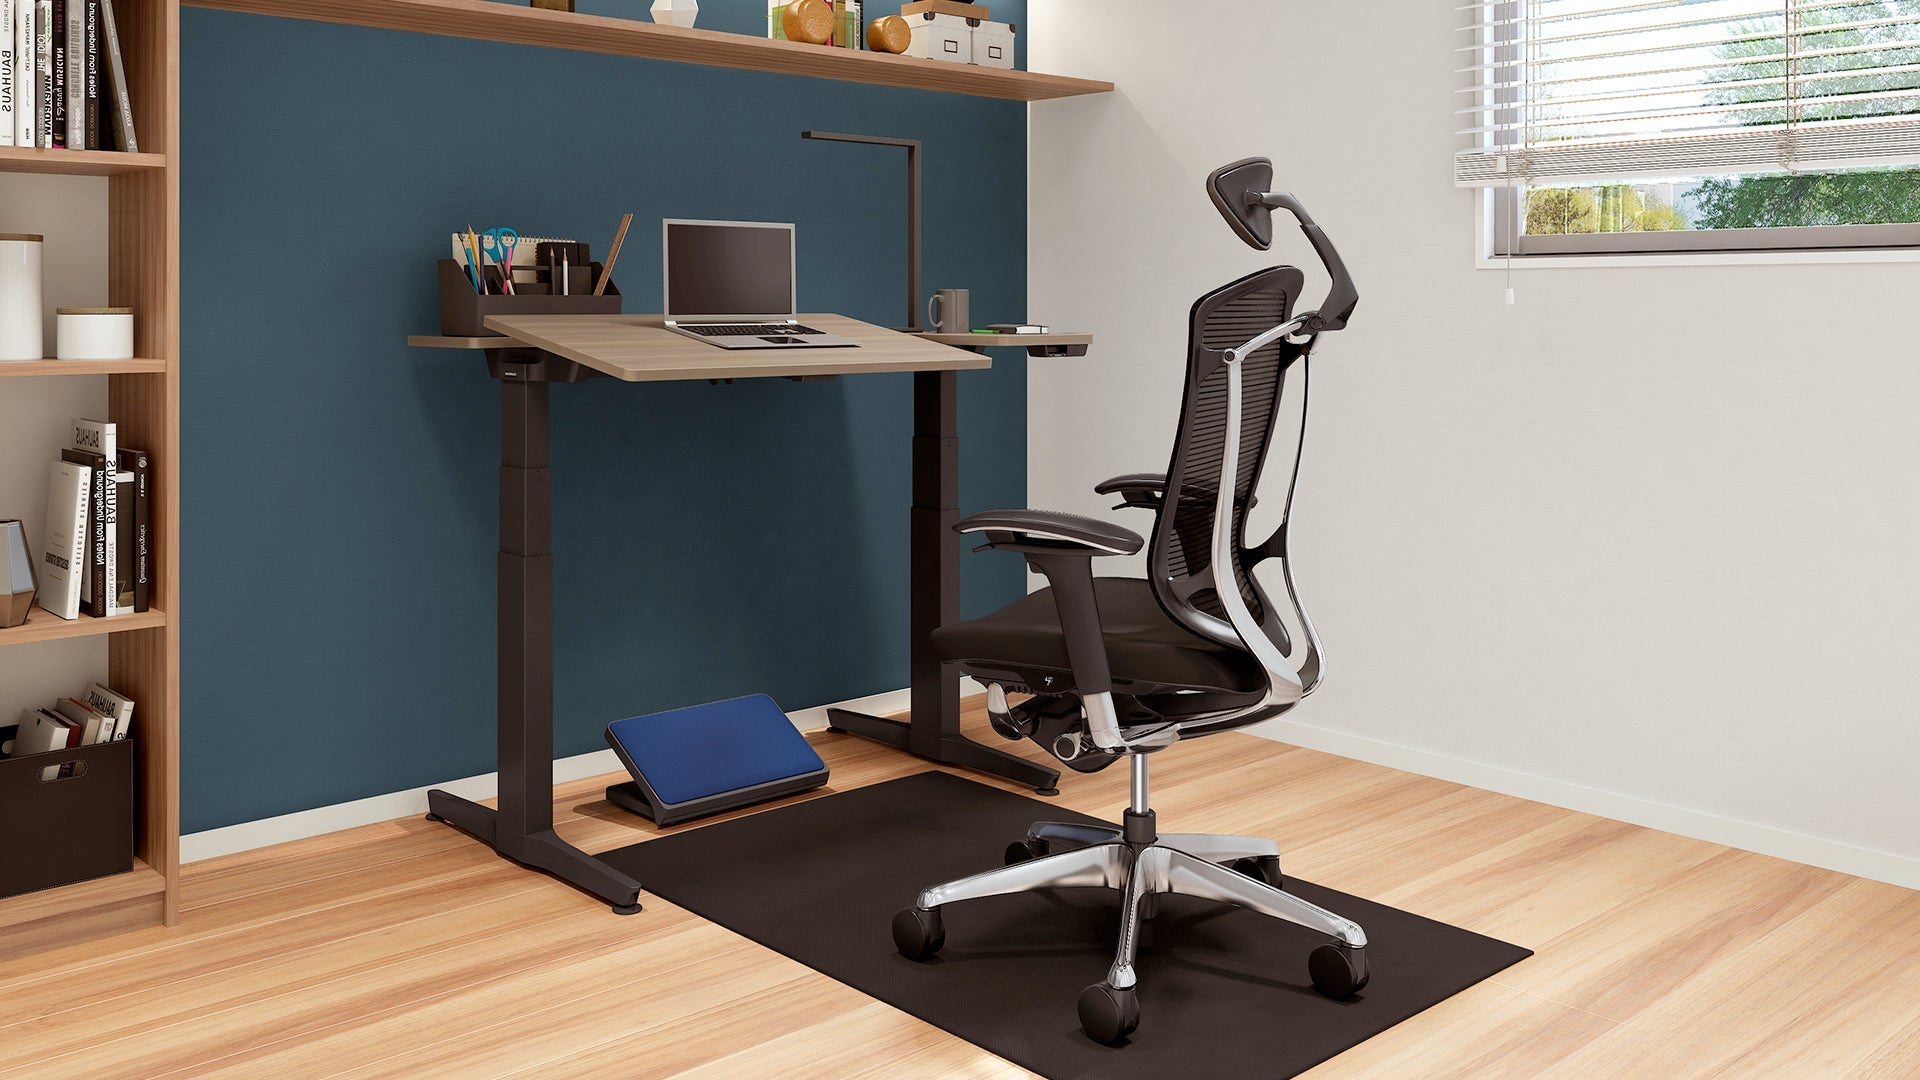 4 Essential Factors to Keep in Mind When Searching for an Ergonomic Chair